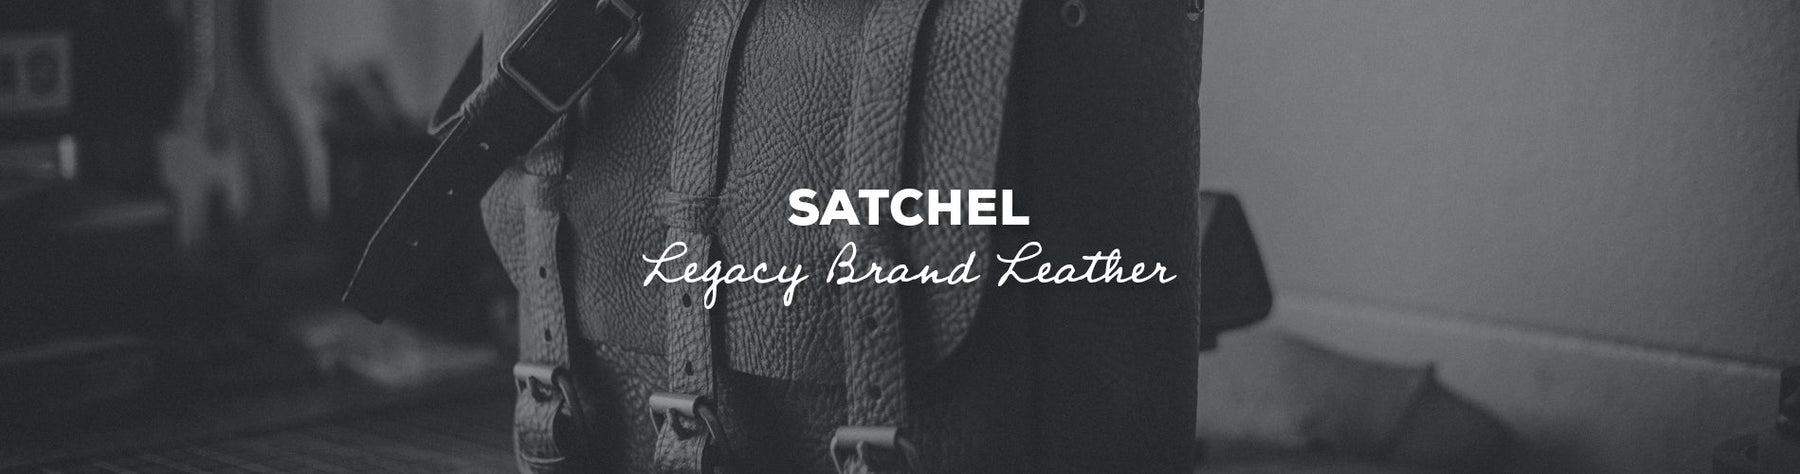 Gift Idea: Satchel with Legacy Brand Leather